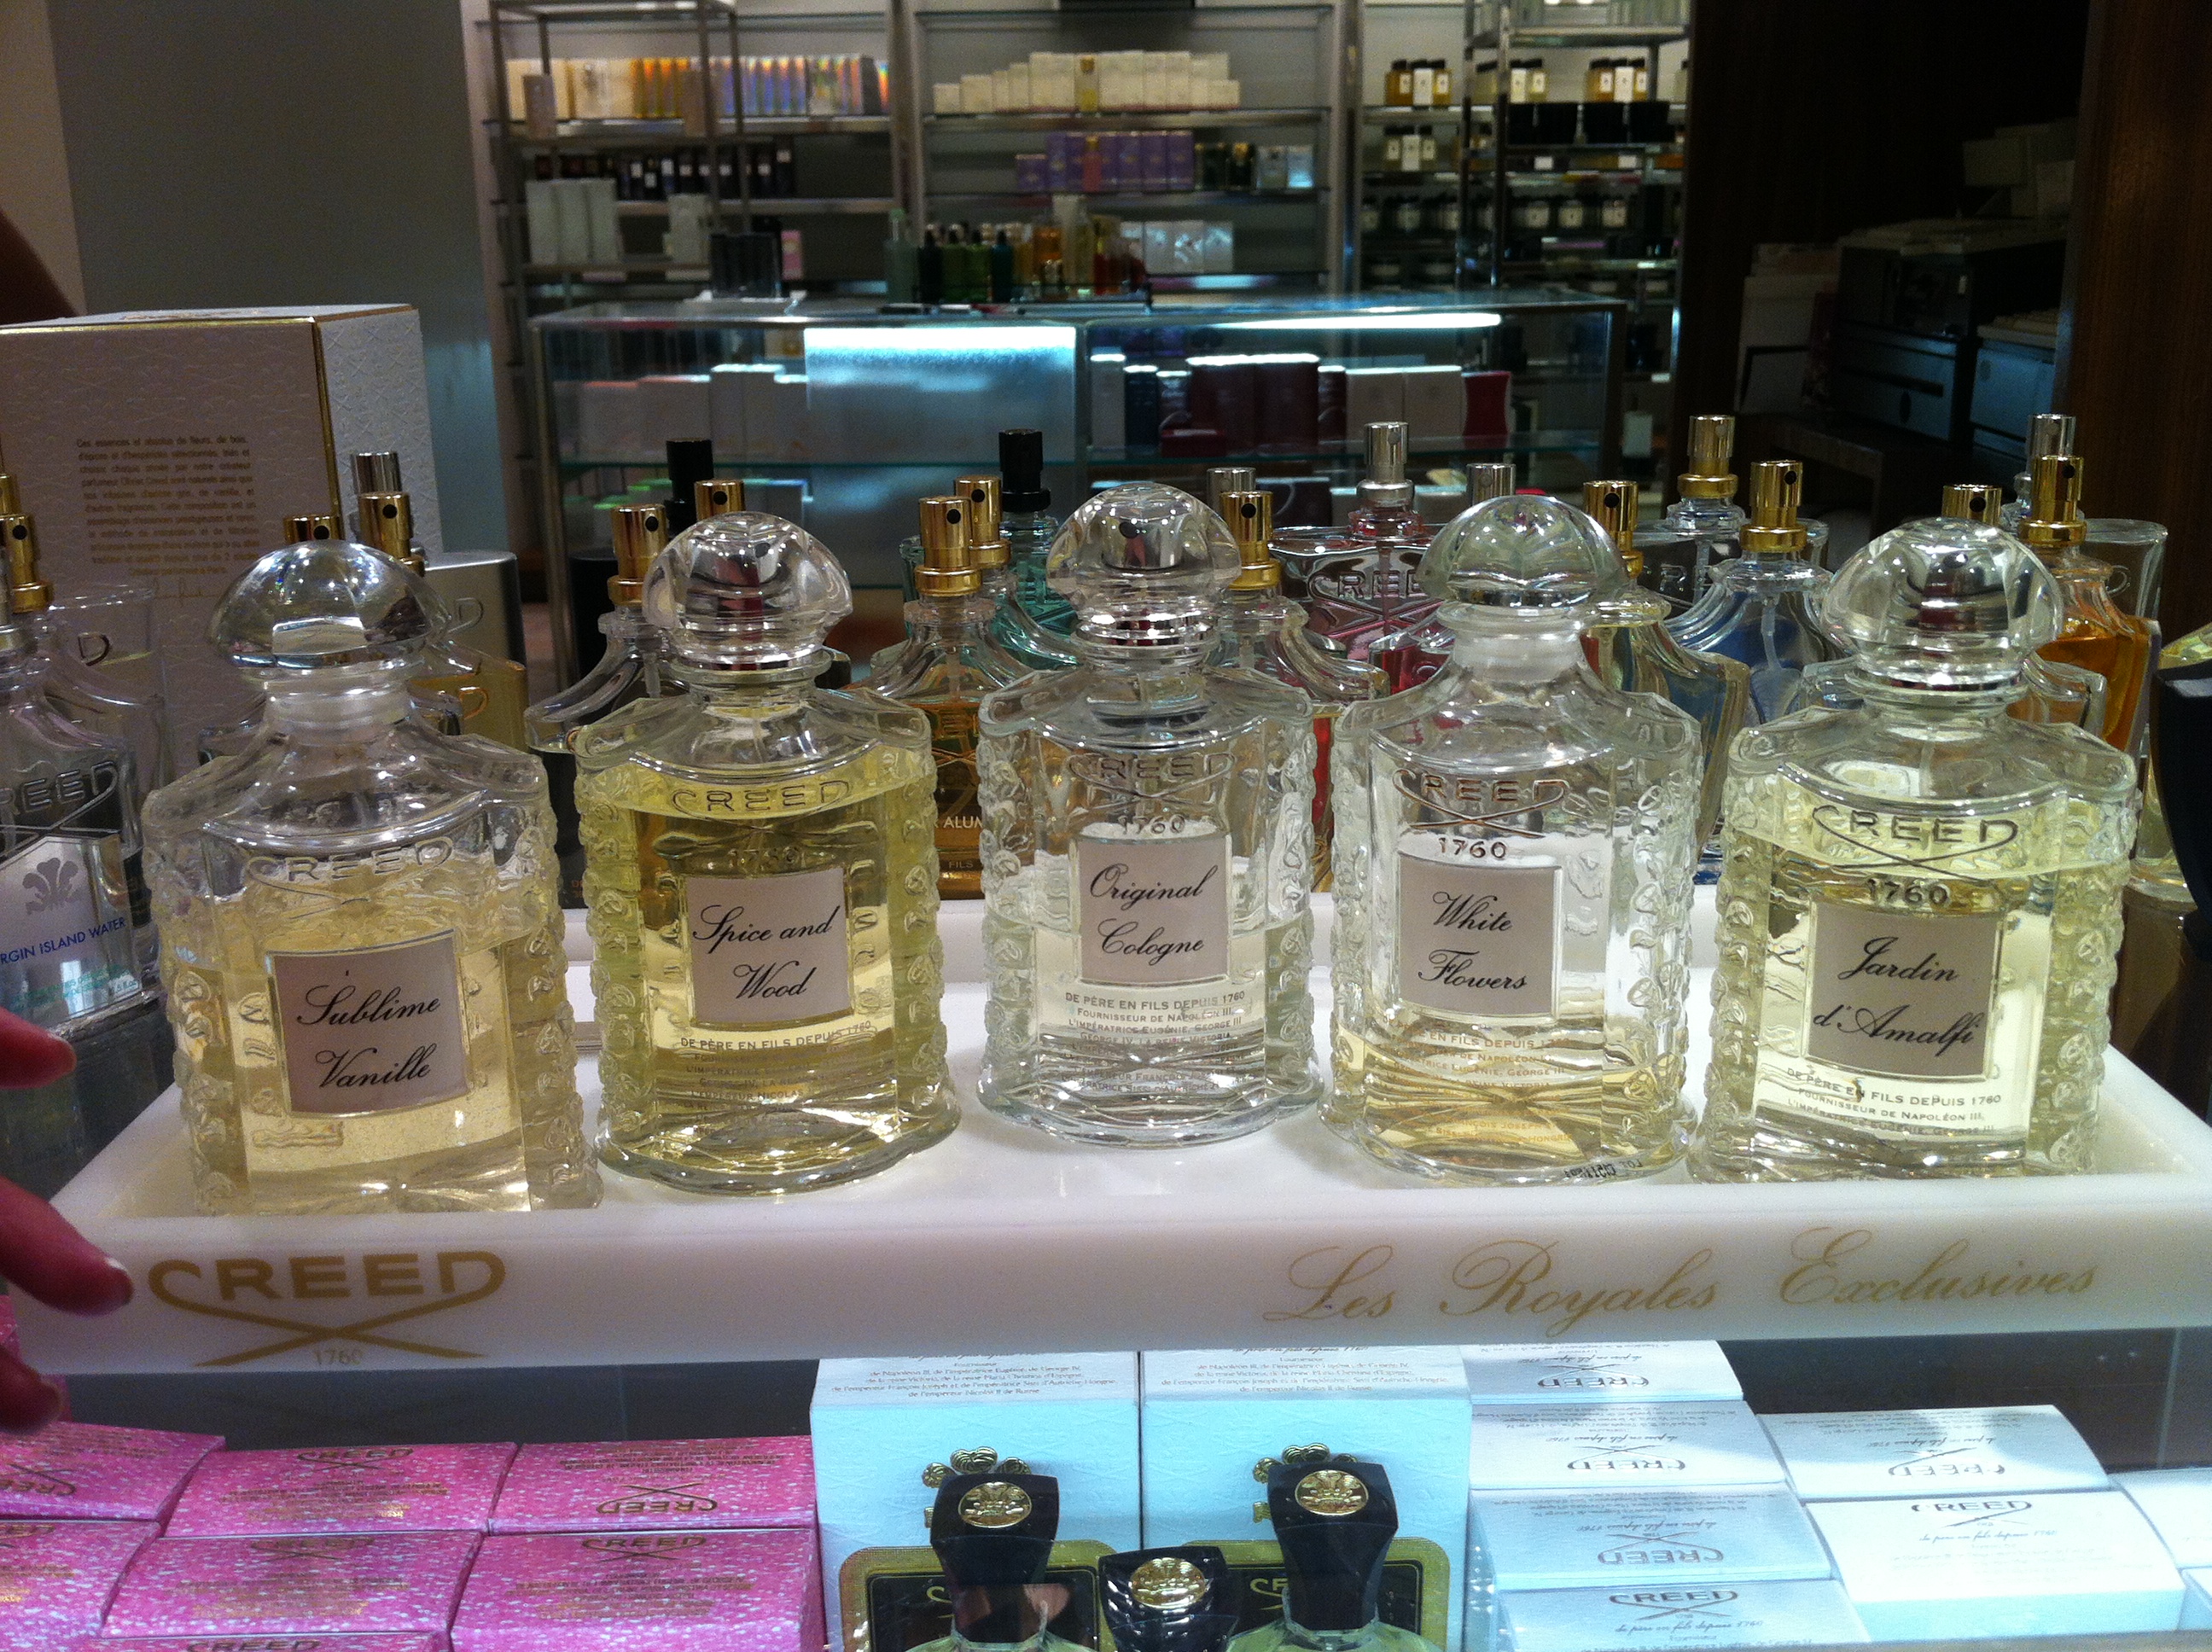 Buying Creed Sublime Vanille at the Neiman Marcus Flagship Store